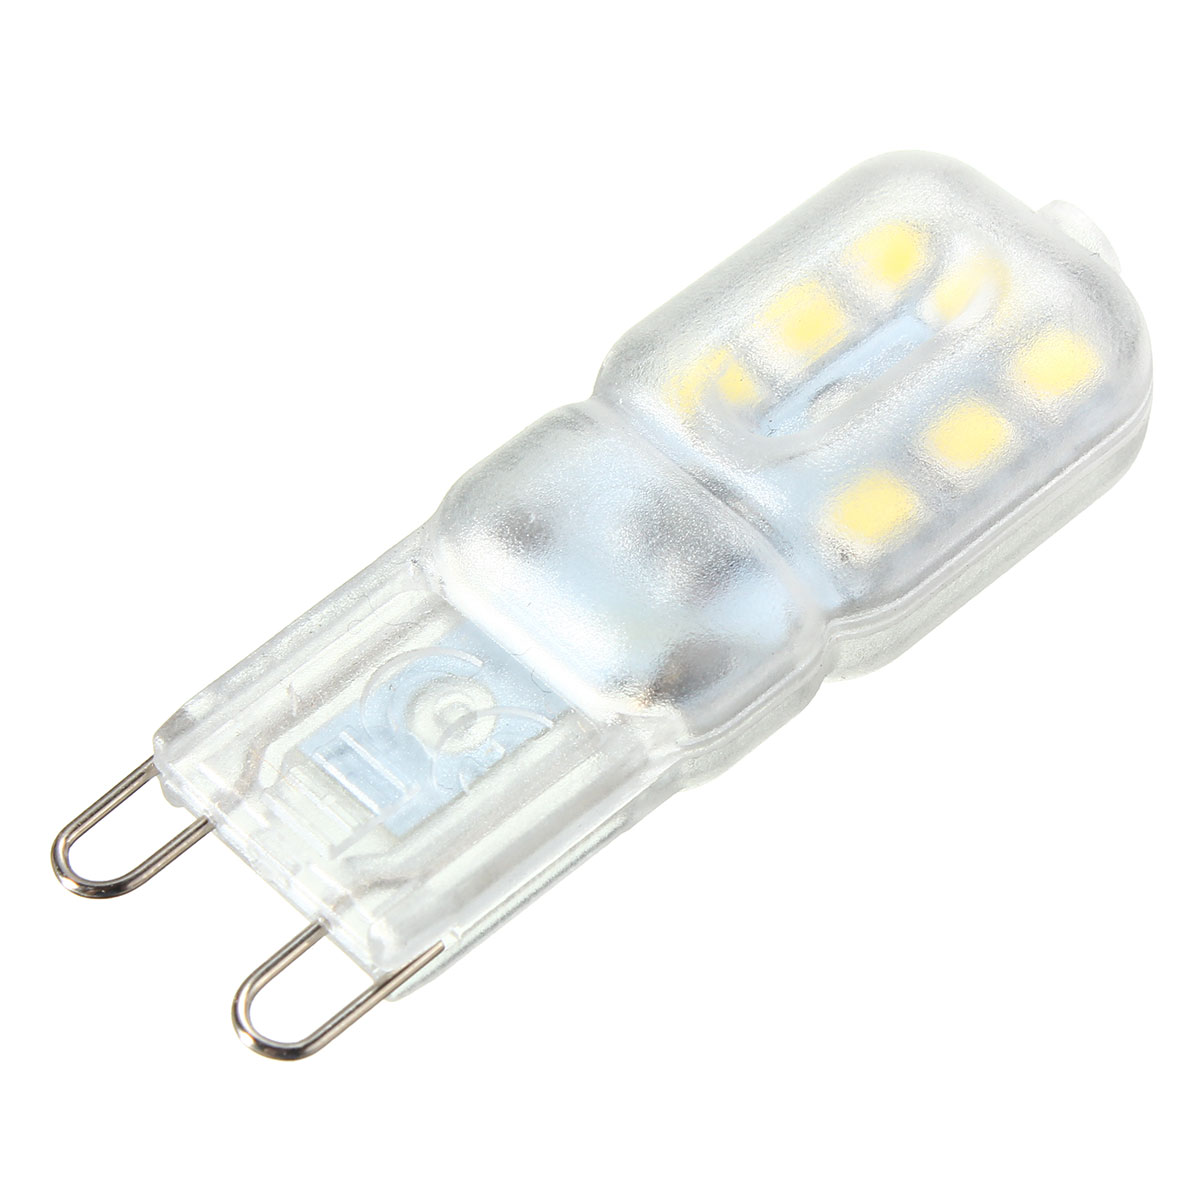 Dimmable-G9-25W-14-SMD-2835-LED-Pure-White-Warm-White-Natural-White-Light-Lamp-Bulb-AC110VAC220V-1073443-9